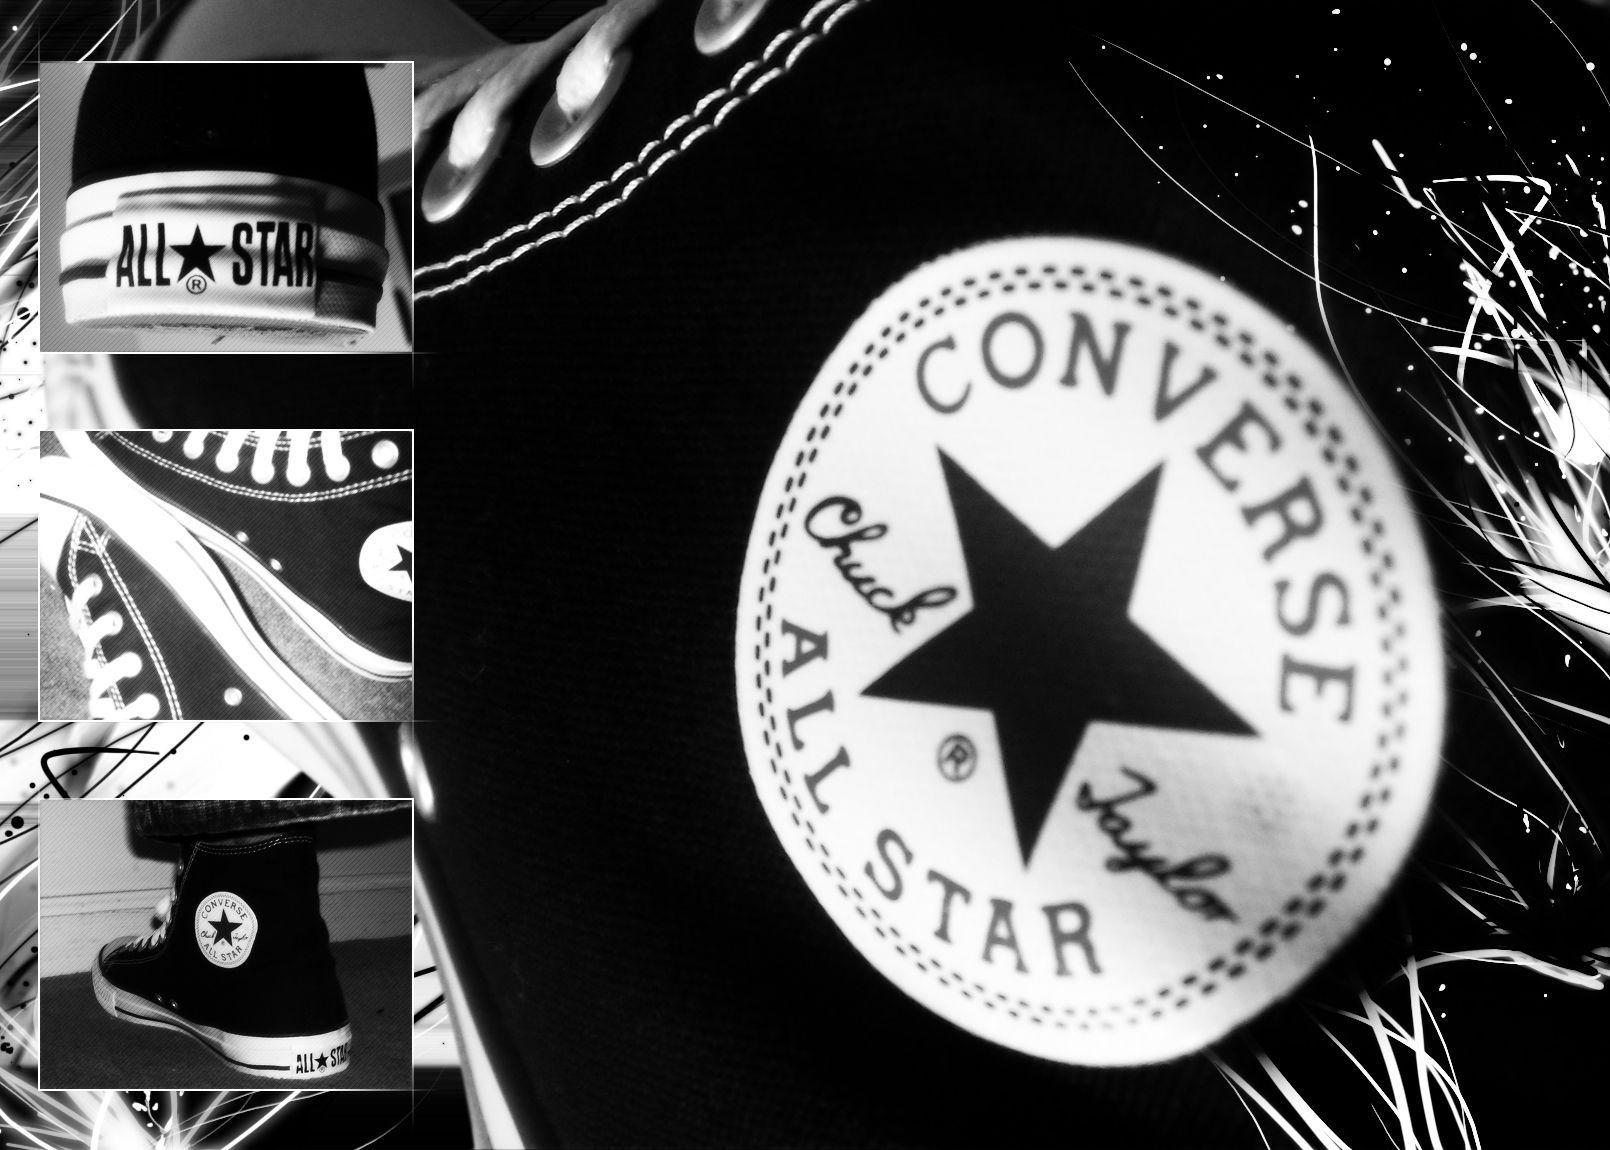 Converse All Star Wallpapers - Wallpaper Cave